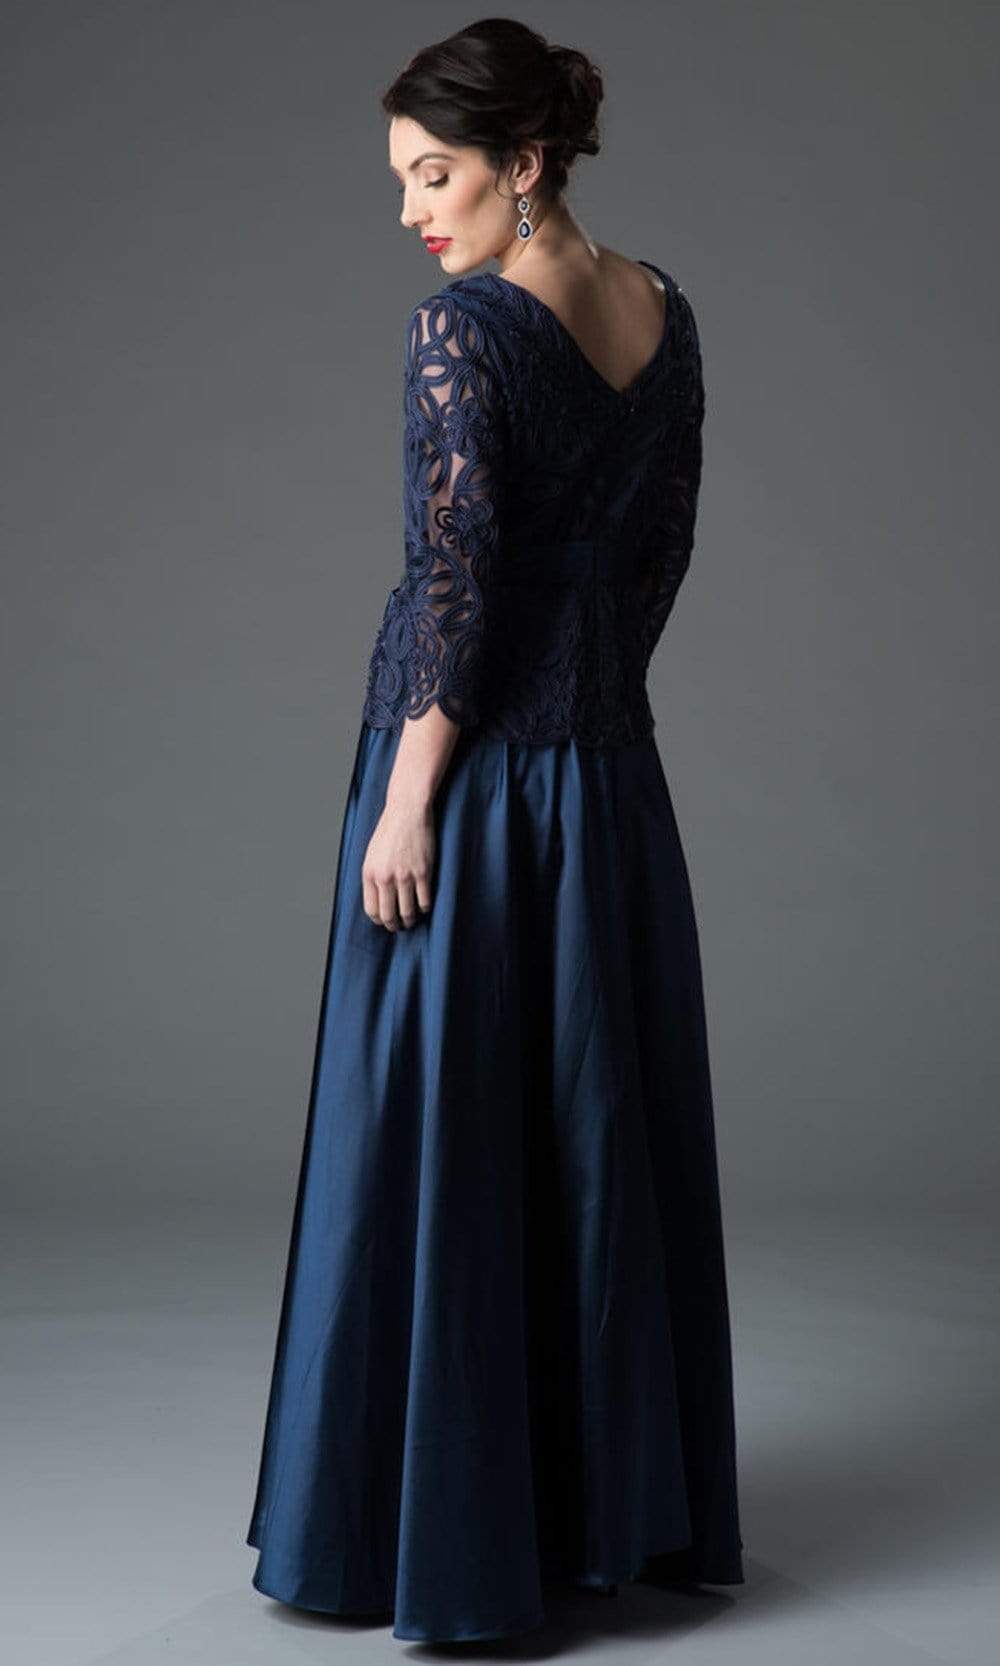 Soulmates - Embroidered Evening Gown 1601 - 1 pc Navy In Size 1X Available CCSALE 1X / Navy